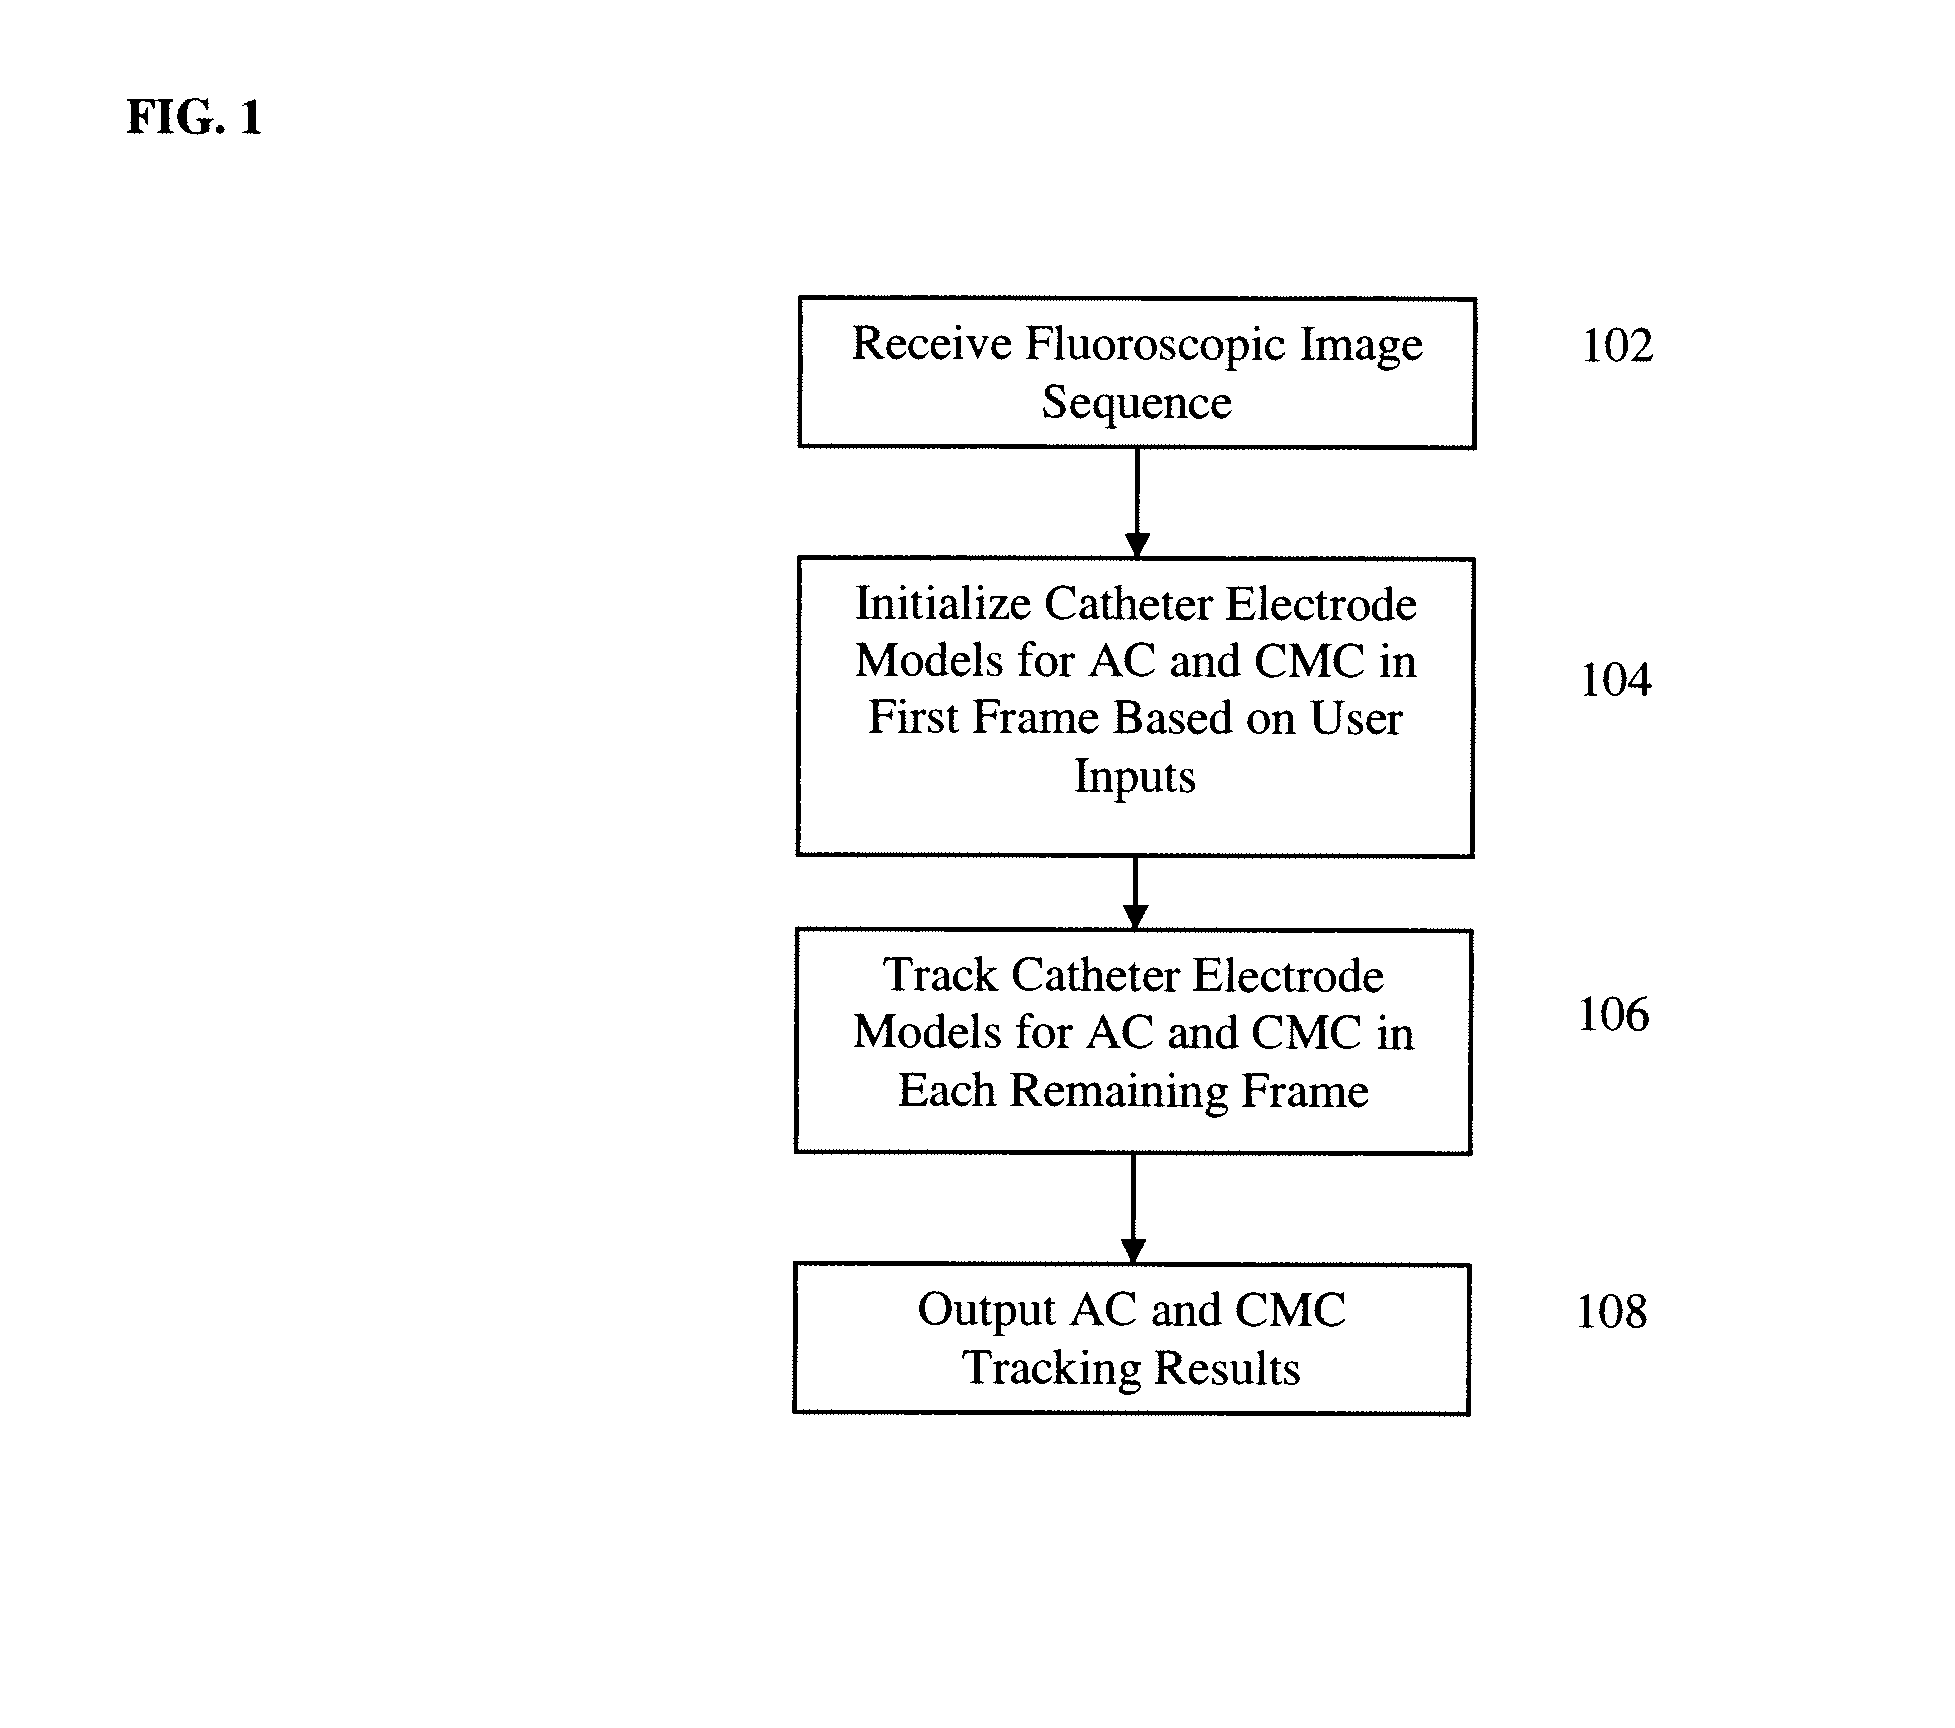 Method and System for Ablation Catheter and Circumferential Mapping Catheter Tracking in Fluoroscopic Images